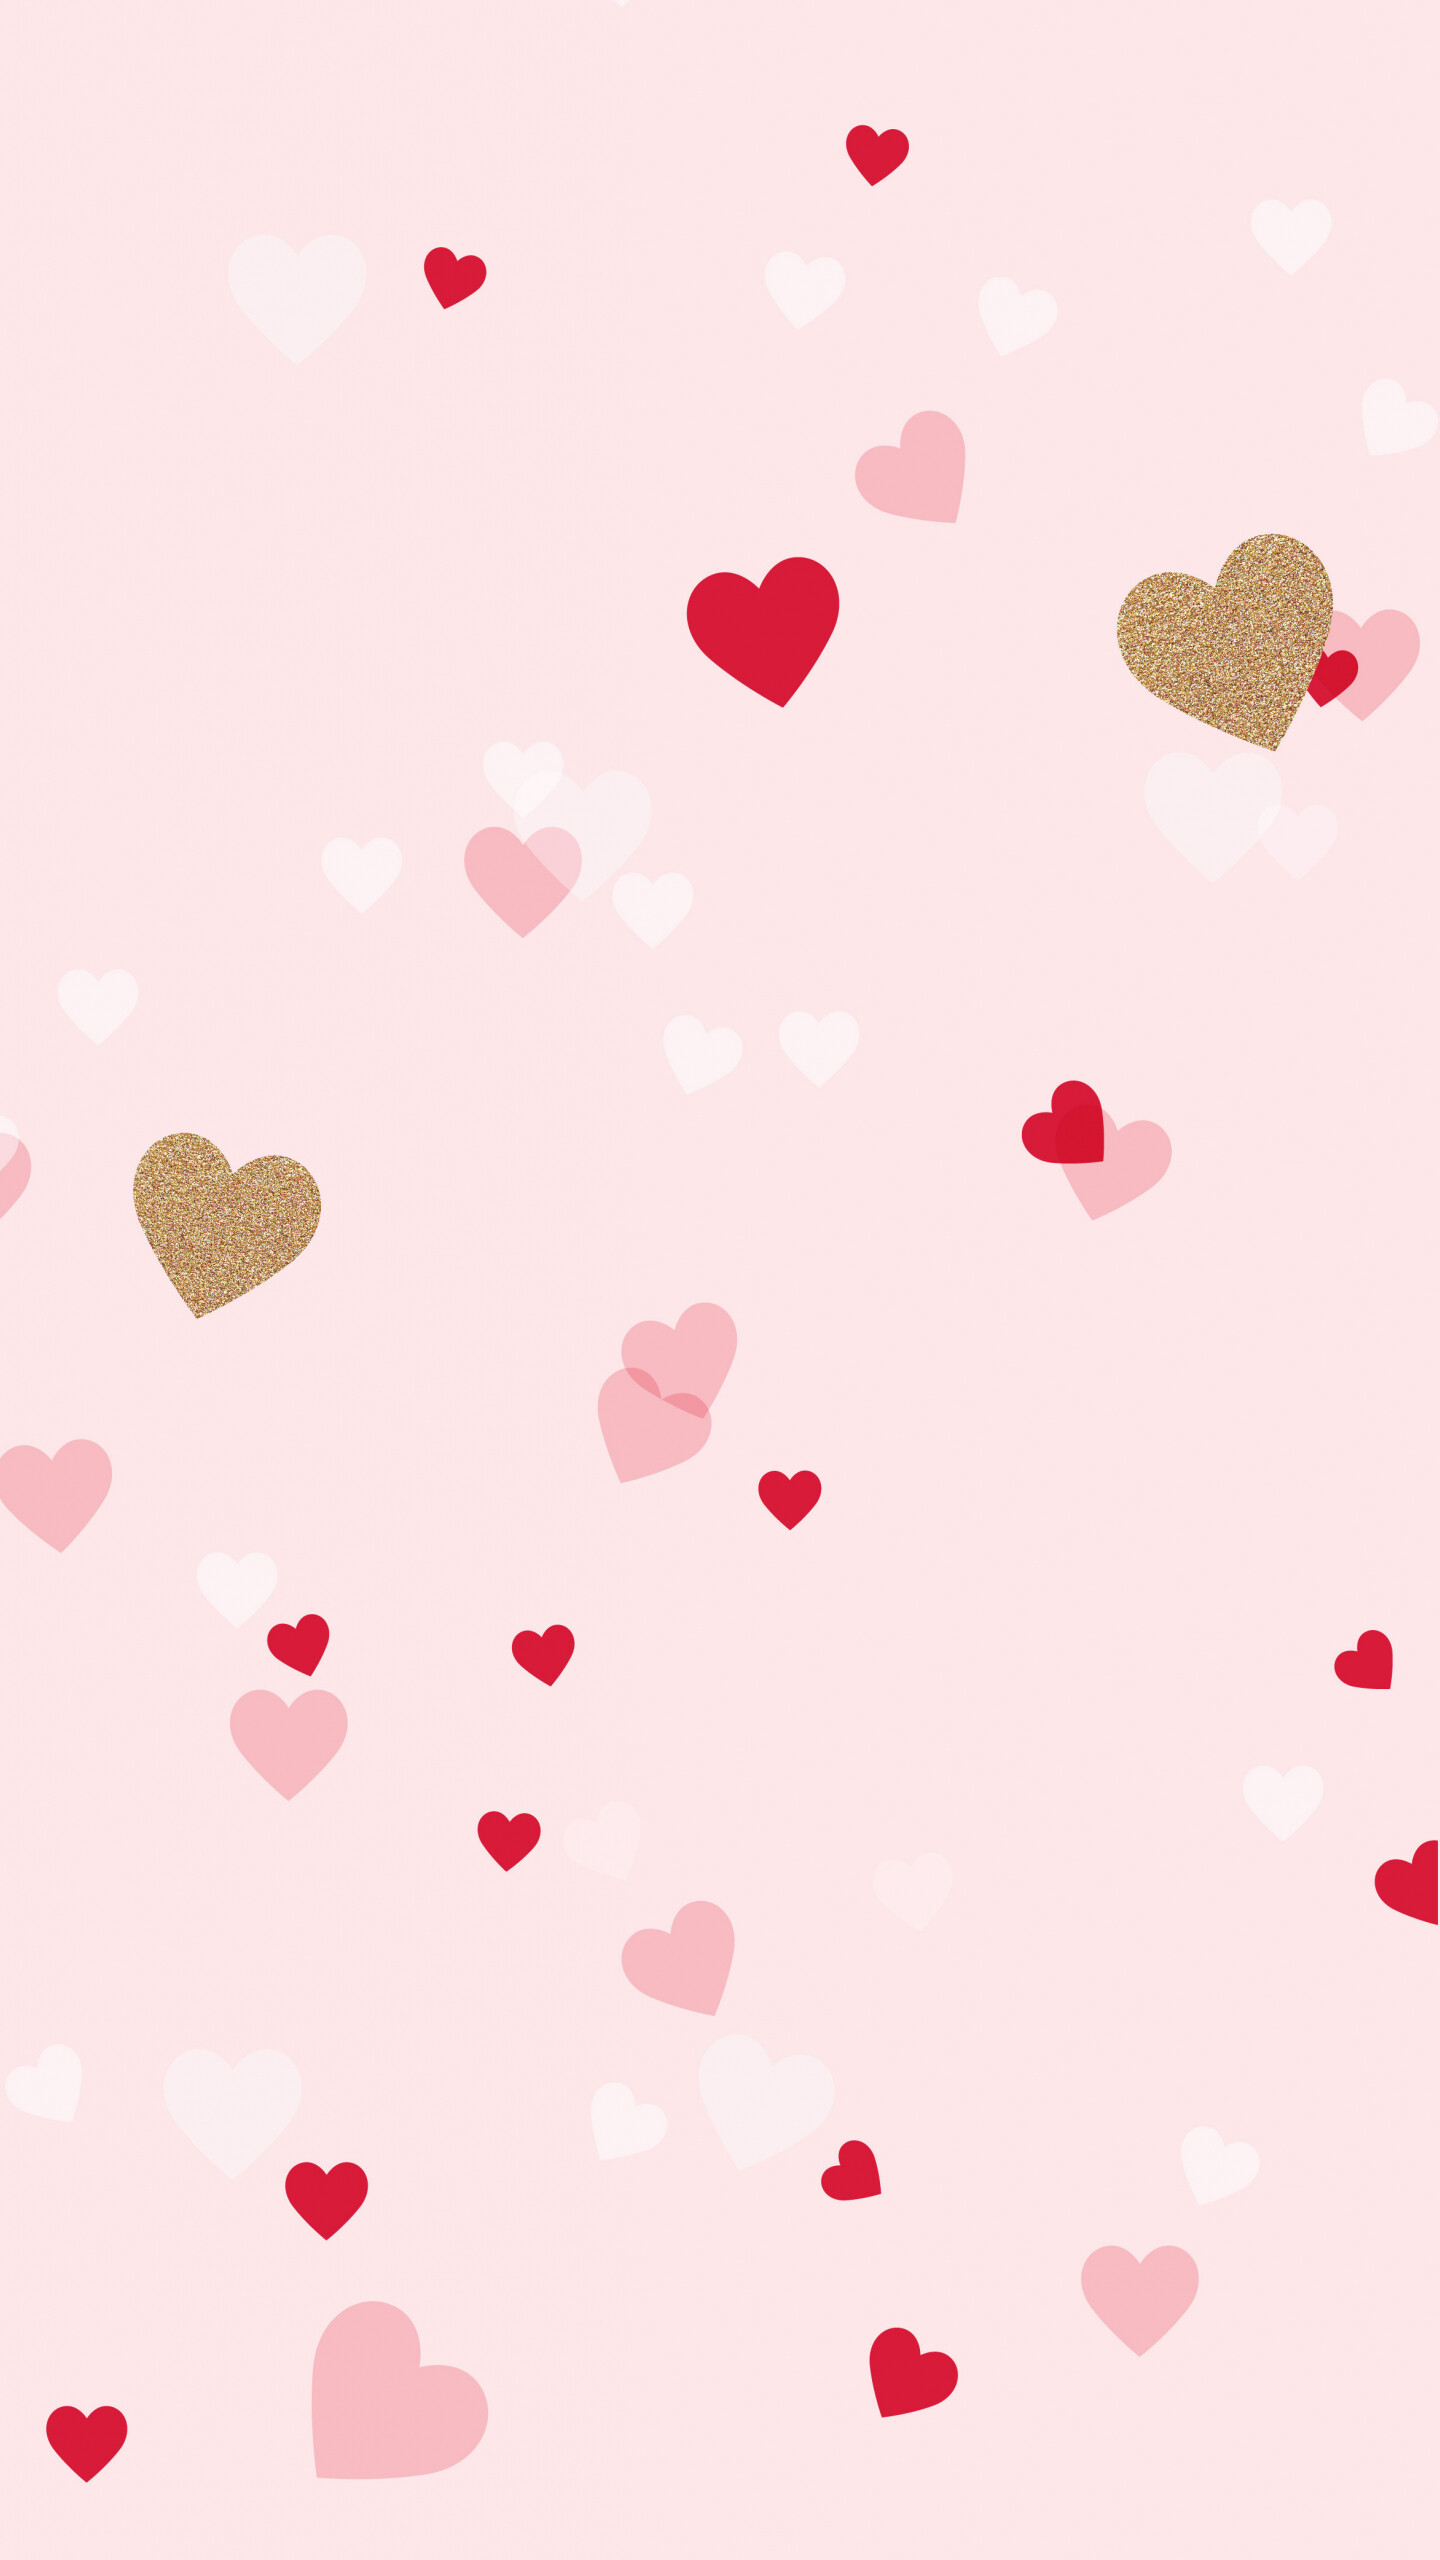 Girly: Sweethearts, Valentine's Day, Stylish falling hearts, Pink. 1440x2560 HD Background.